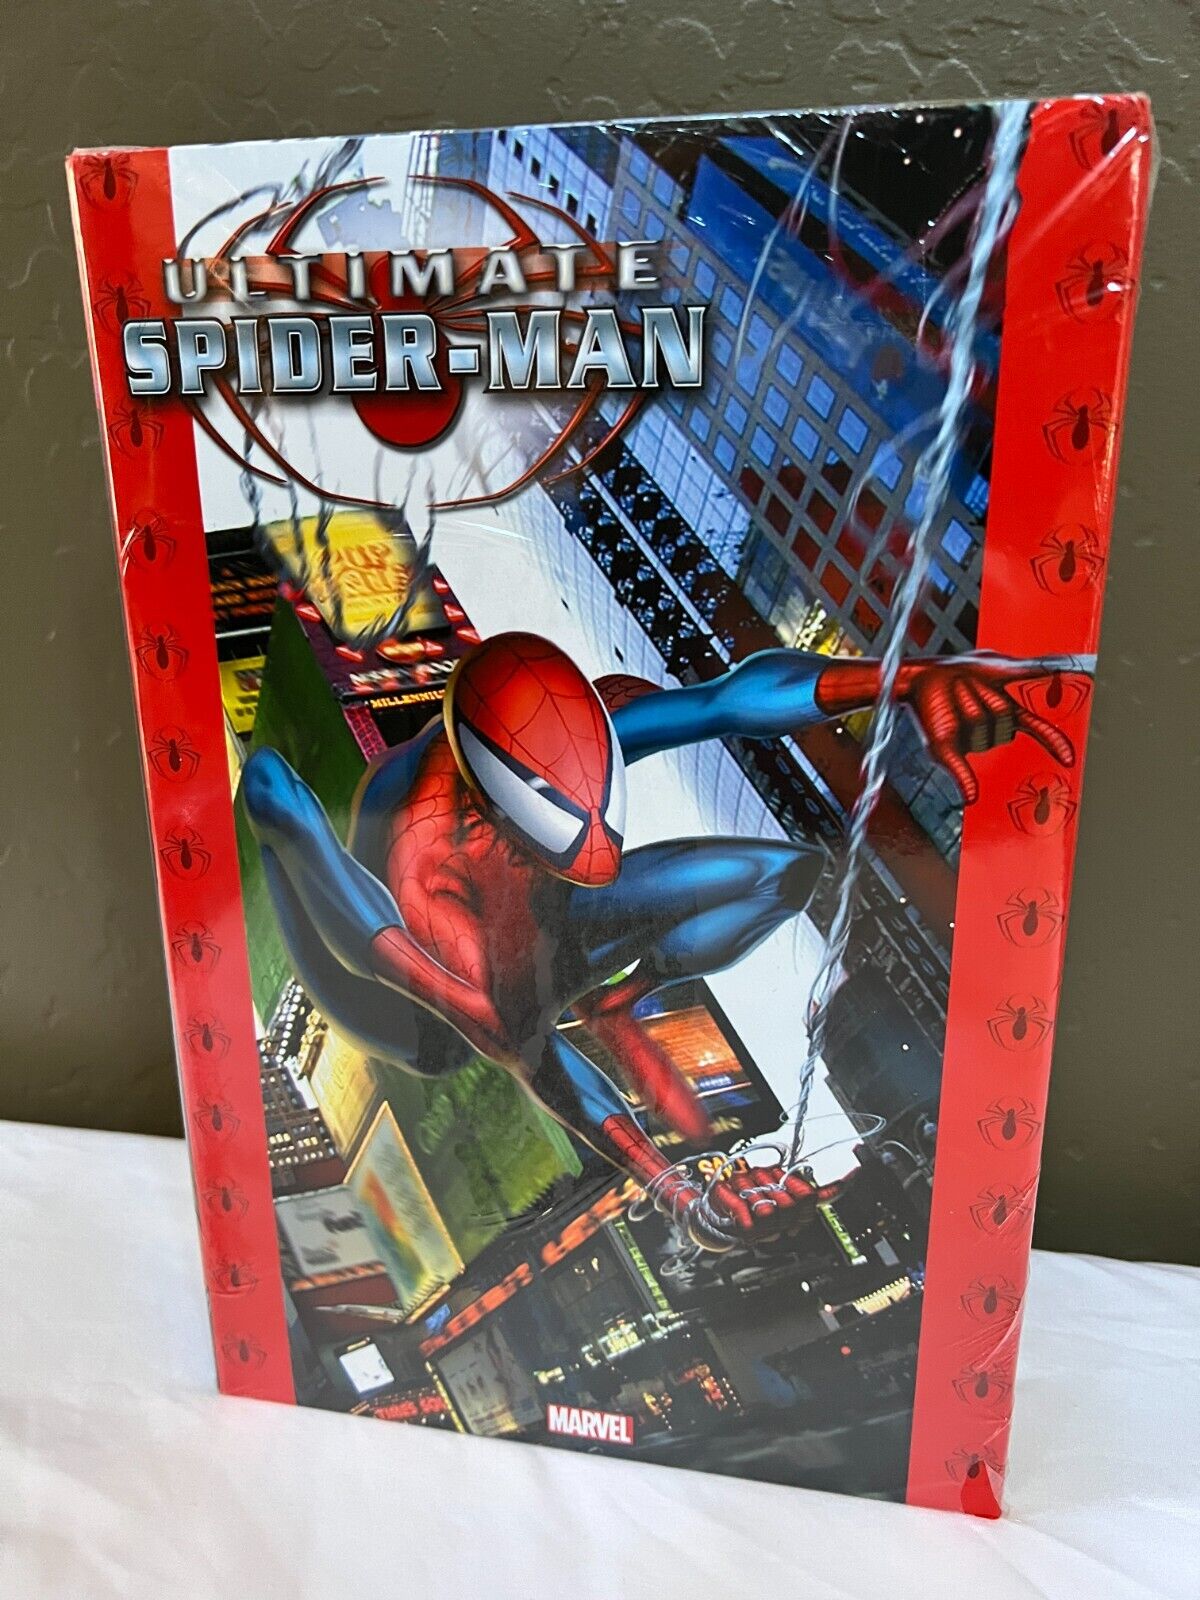 Ultimate Spider-Man Omnibus Vol 1 Quesada Cover New HC Hardcover Sealed New PTG